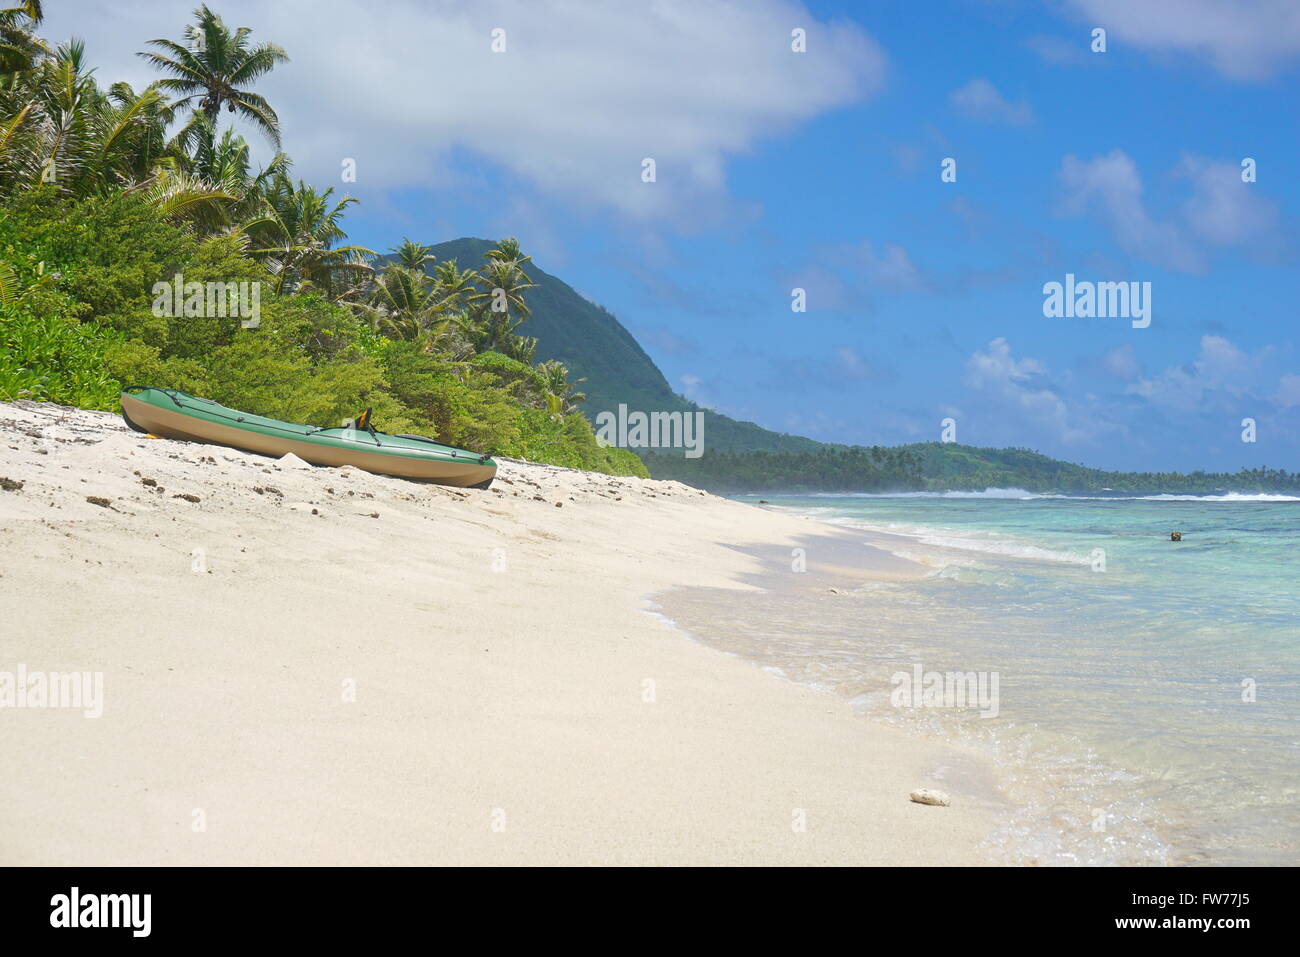 Kayak on a pristine sandy beach of the island of Huahine, Pacific ocean, French Polynesia Stock Photo